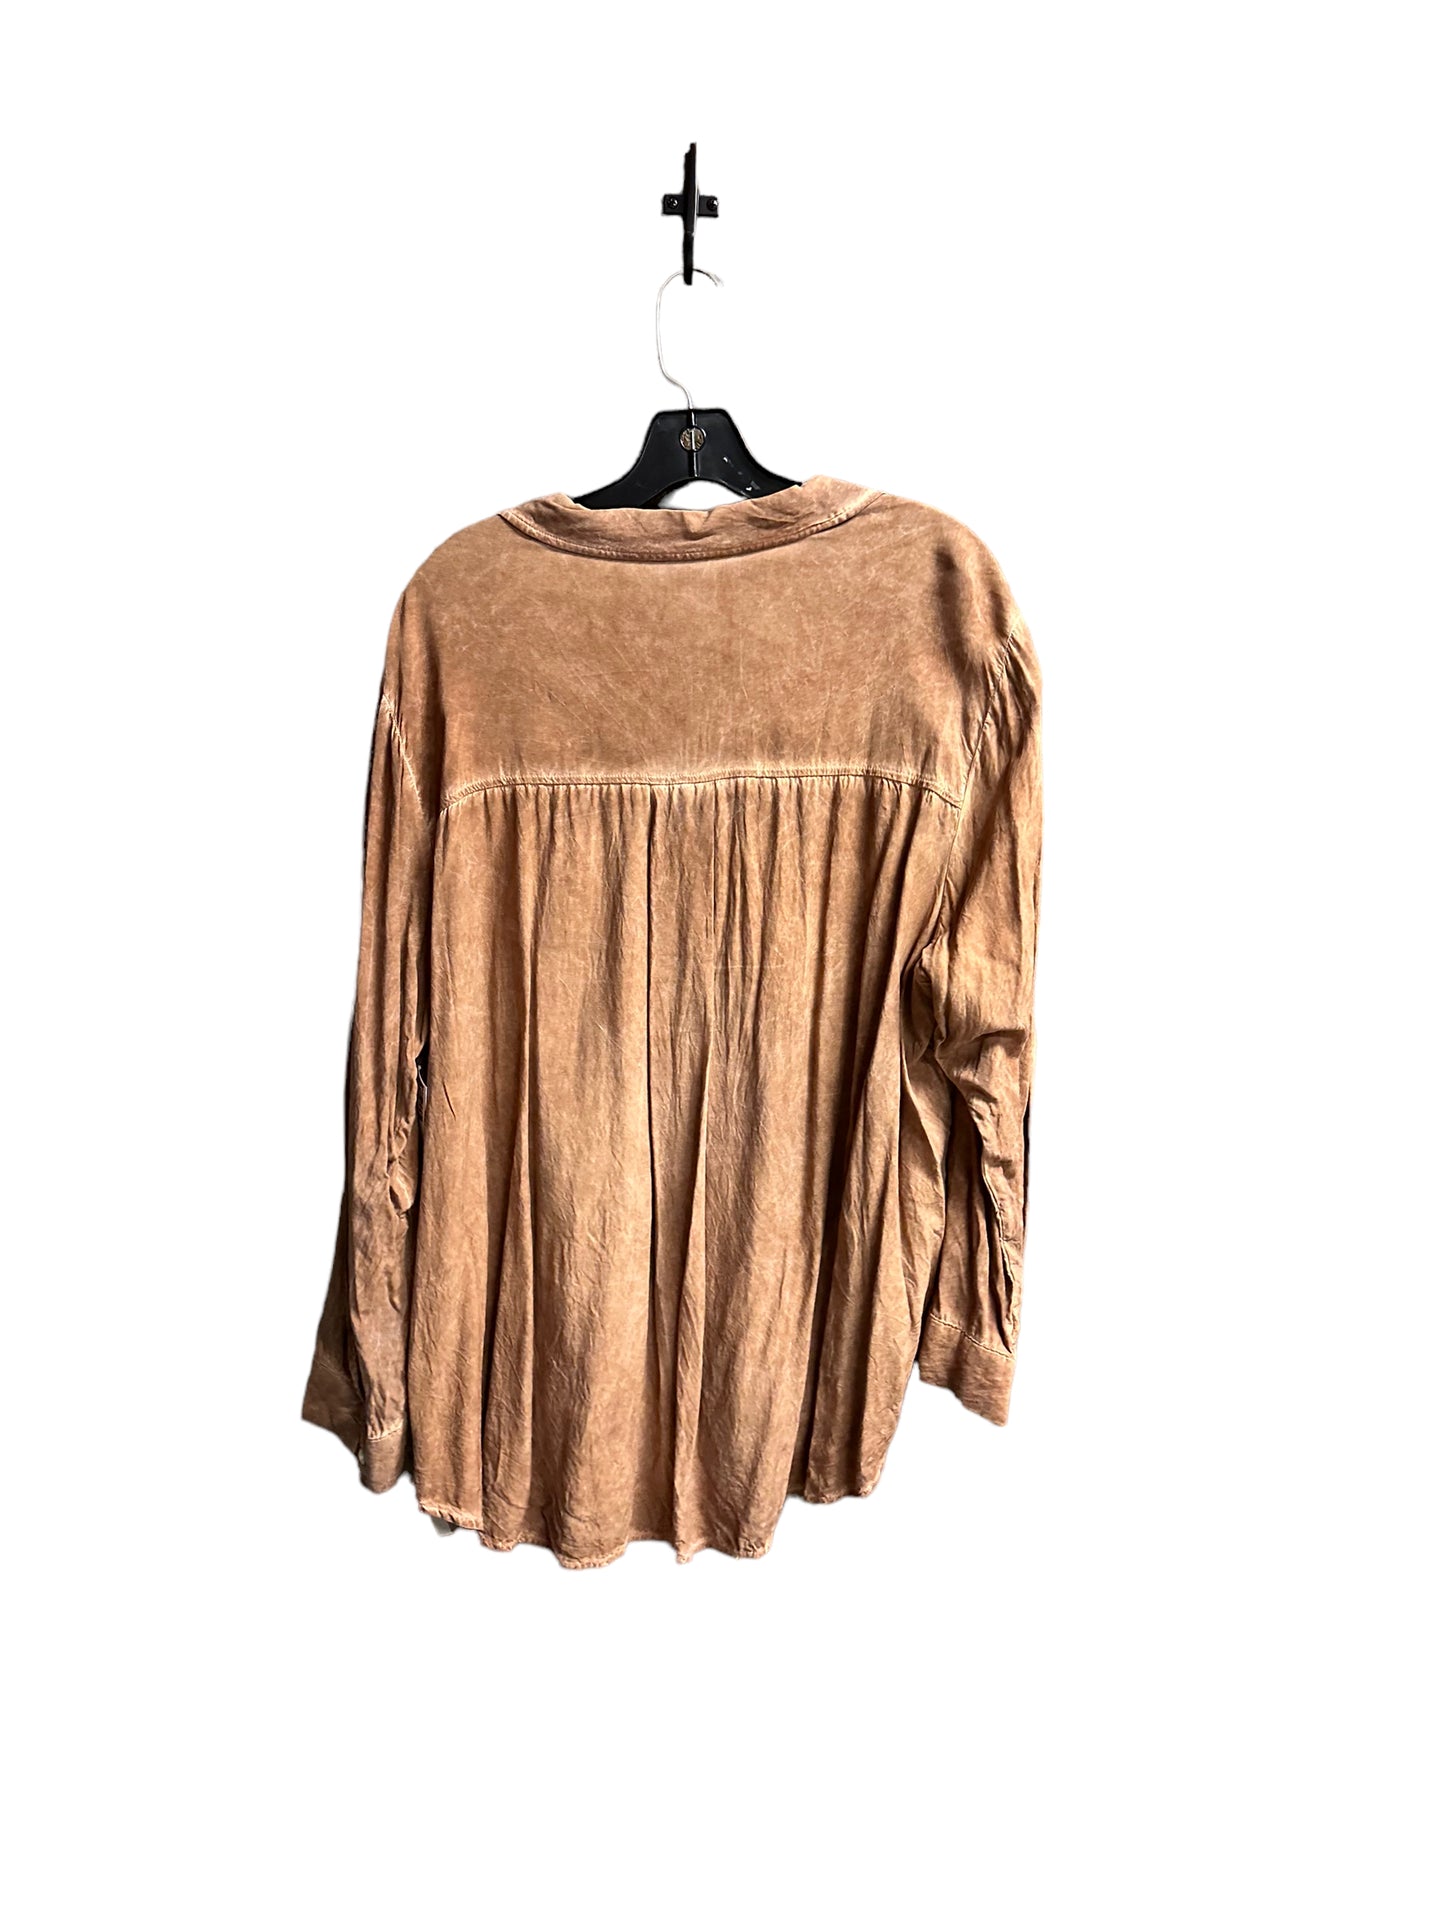 Top Long Sleeve By Jane And Delancey  Size: 2x